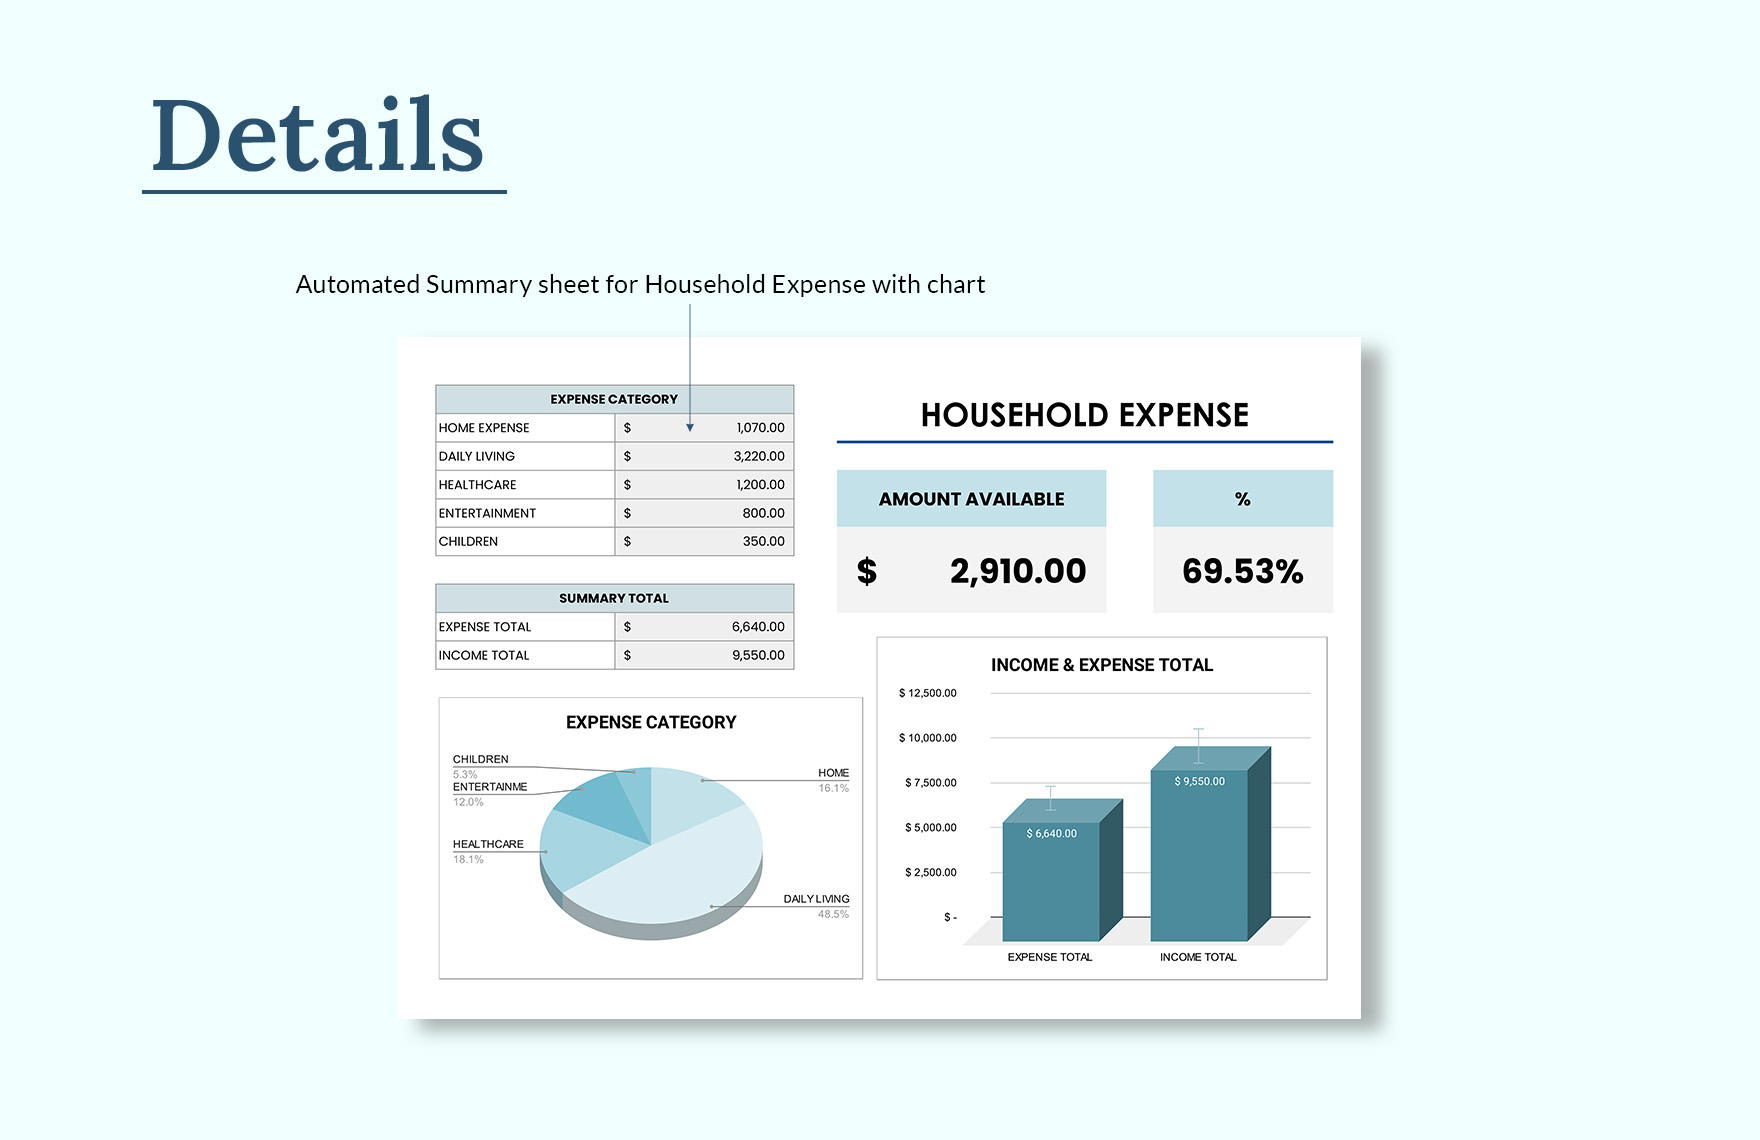 Household Expense Template